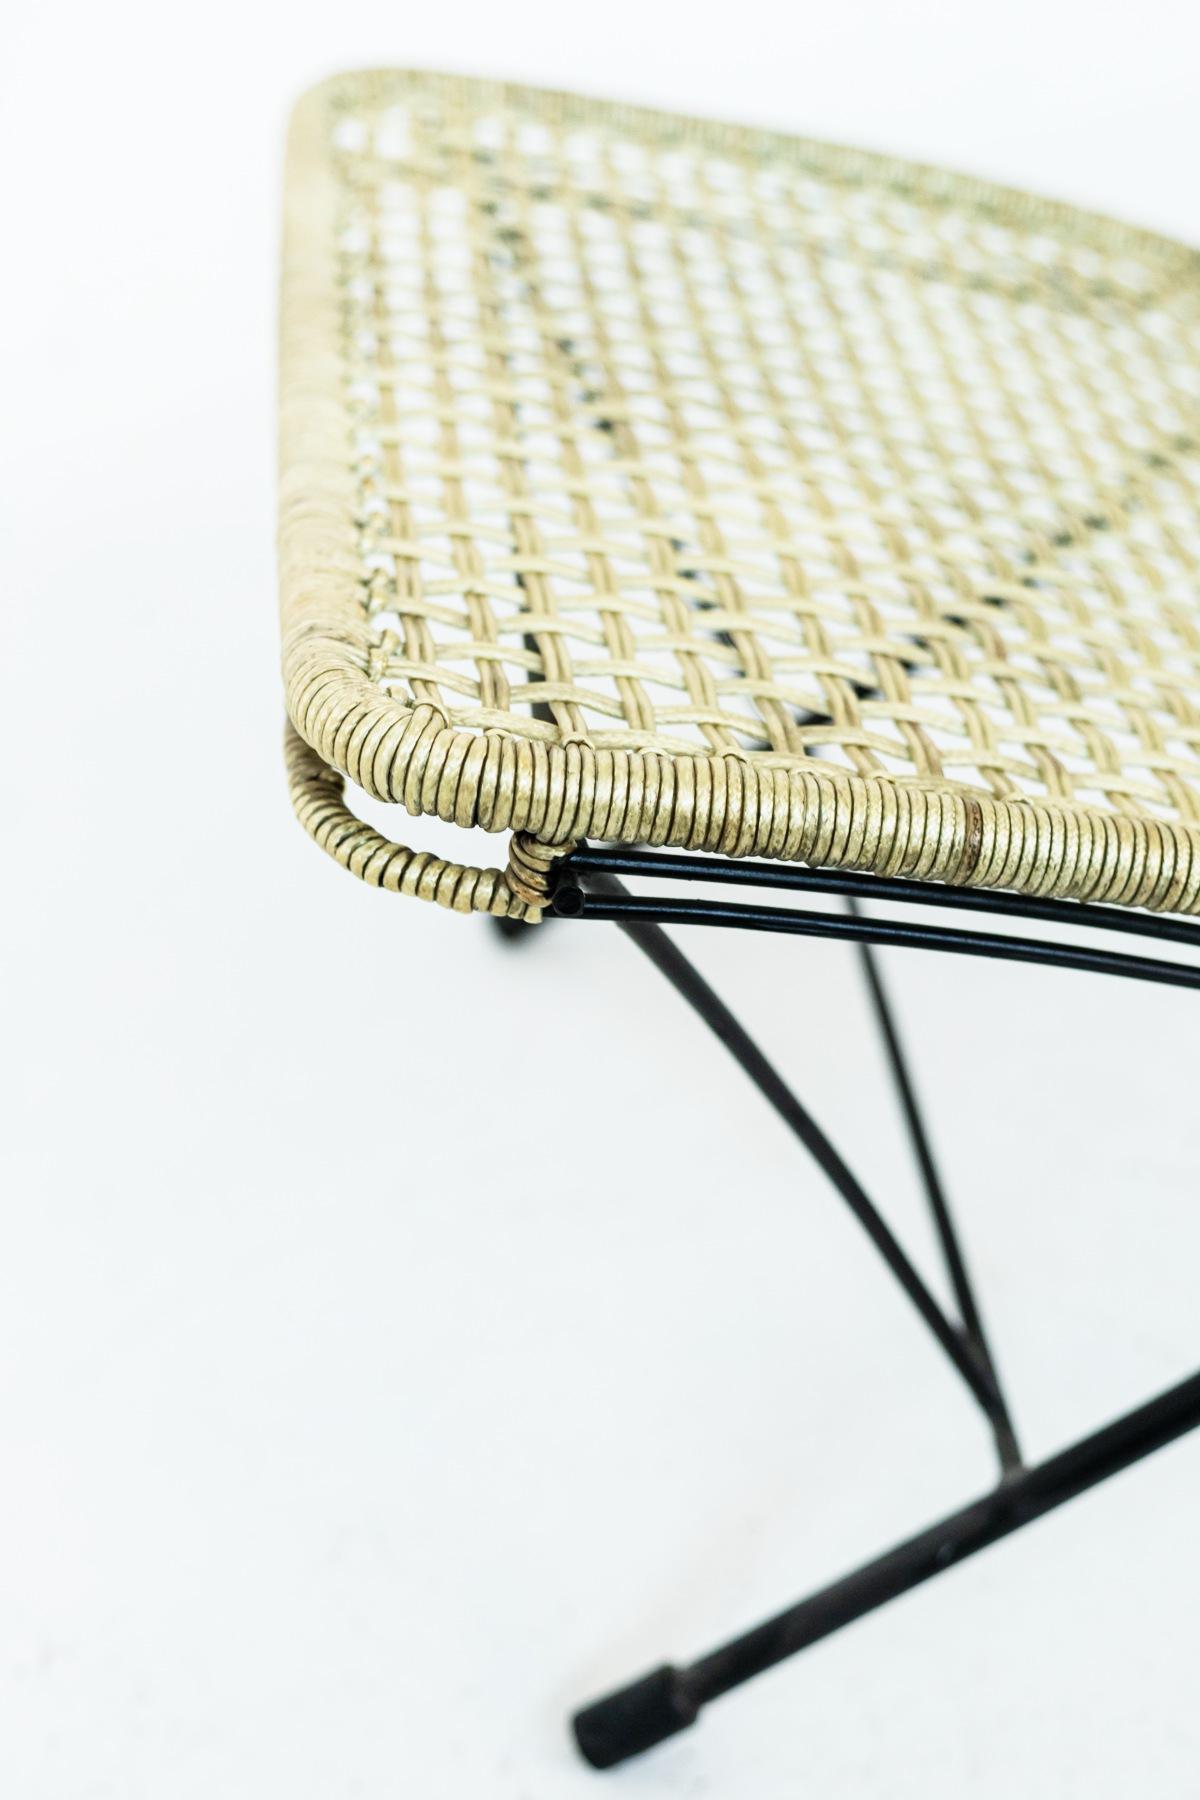 The pair of vintage outdoor chairs are from the 50s and of fine Italian manufacture. 
The structure is made of iron with woven plastic rope to make up the seat and back-rest. The chairs are very beautiful with their elegantly curved legs and